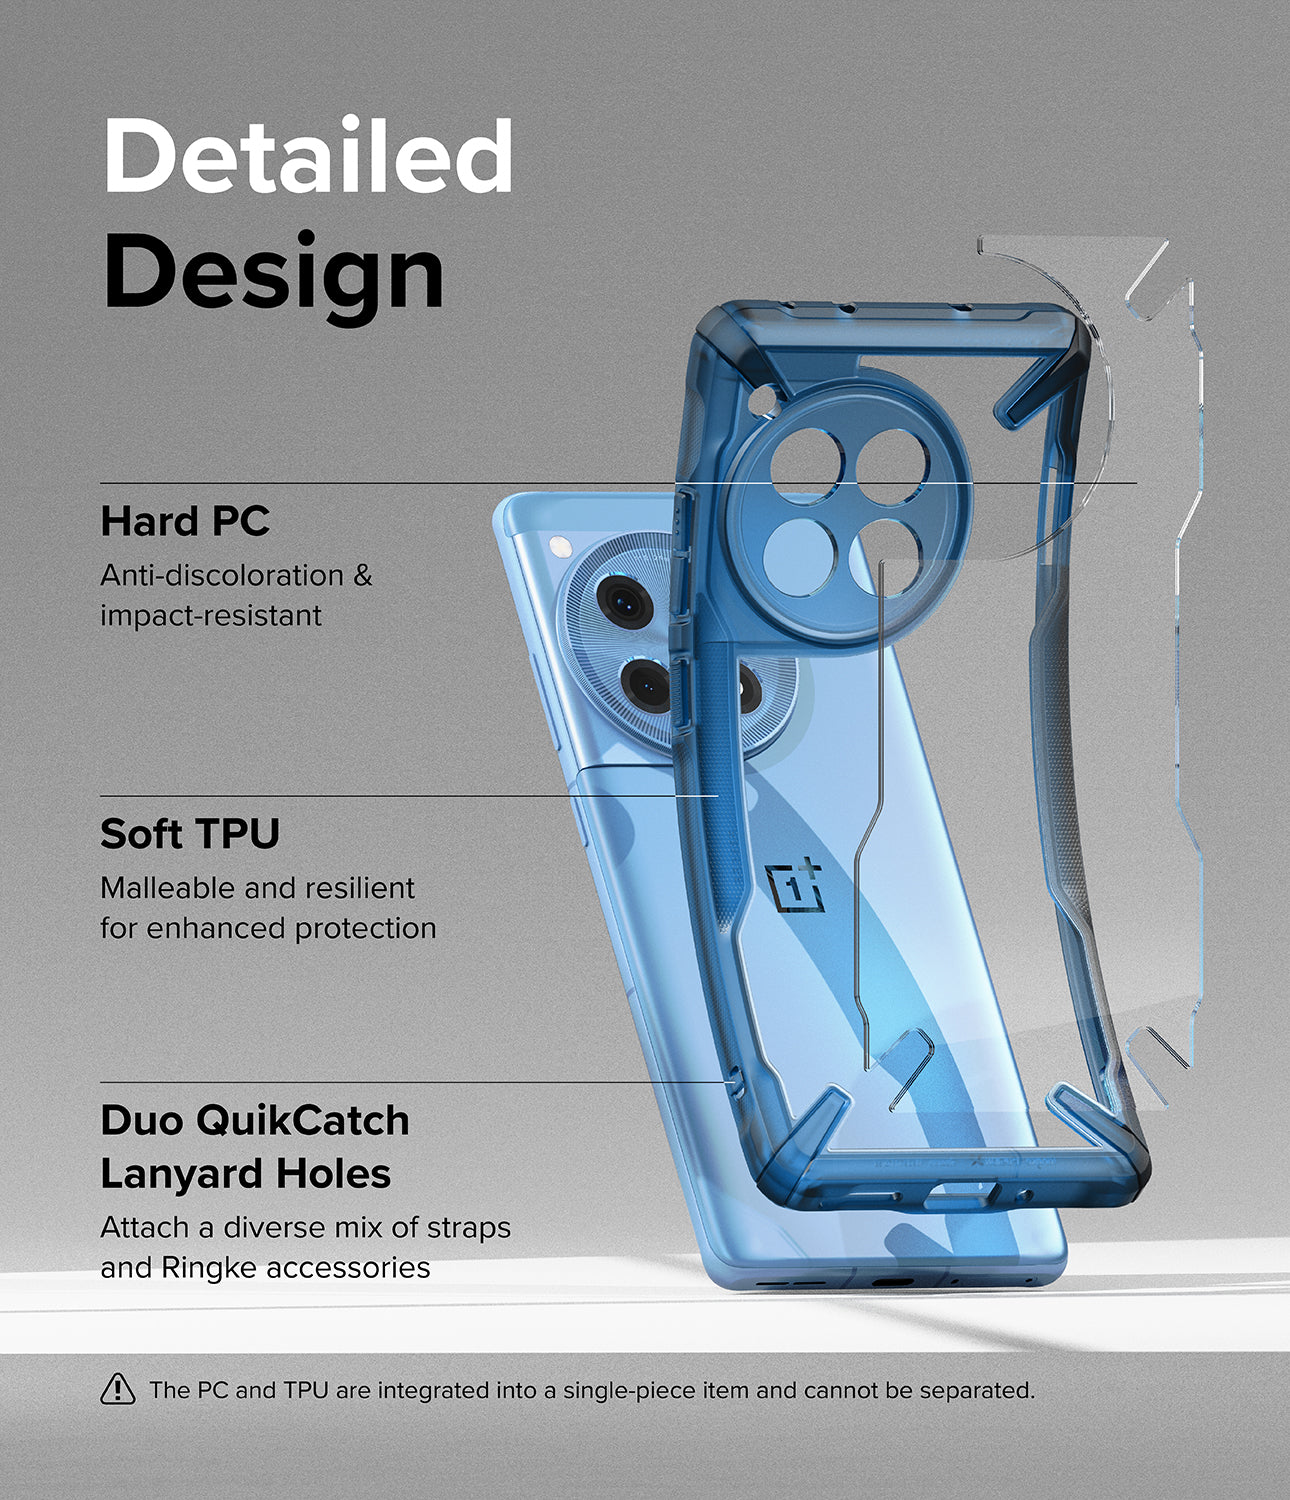 OnePlus 12R Case | Fusion-X Space Blue - Detailed Design. Anti-discoloration and impact resistant with Hard PC. Malleable and resilient for enhanced protection with Soft TPU. Duo QuikCatch Lanyard Holes to attach a diverse mix of straps and Ringke accessories.